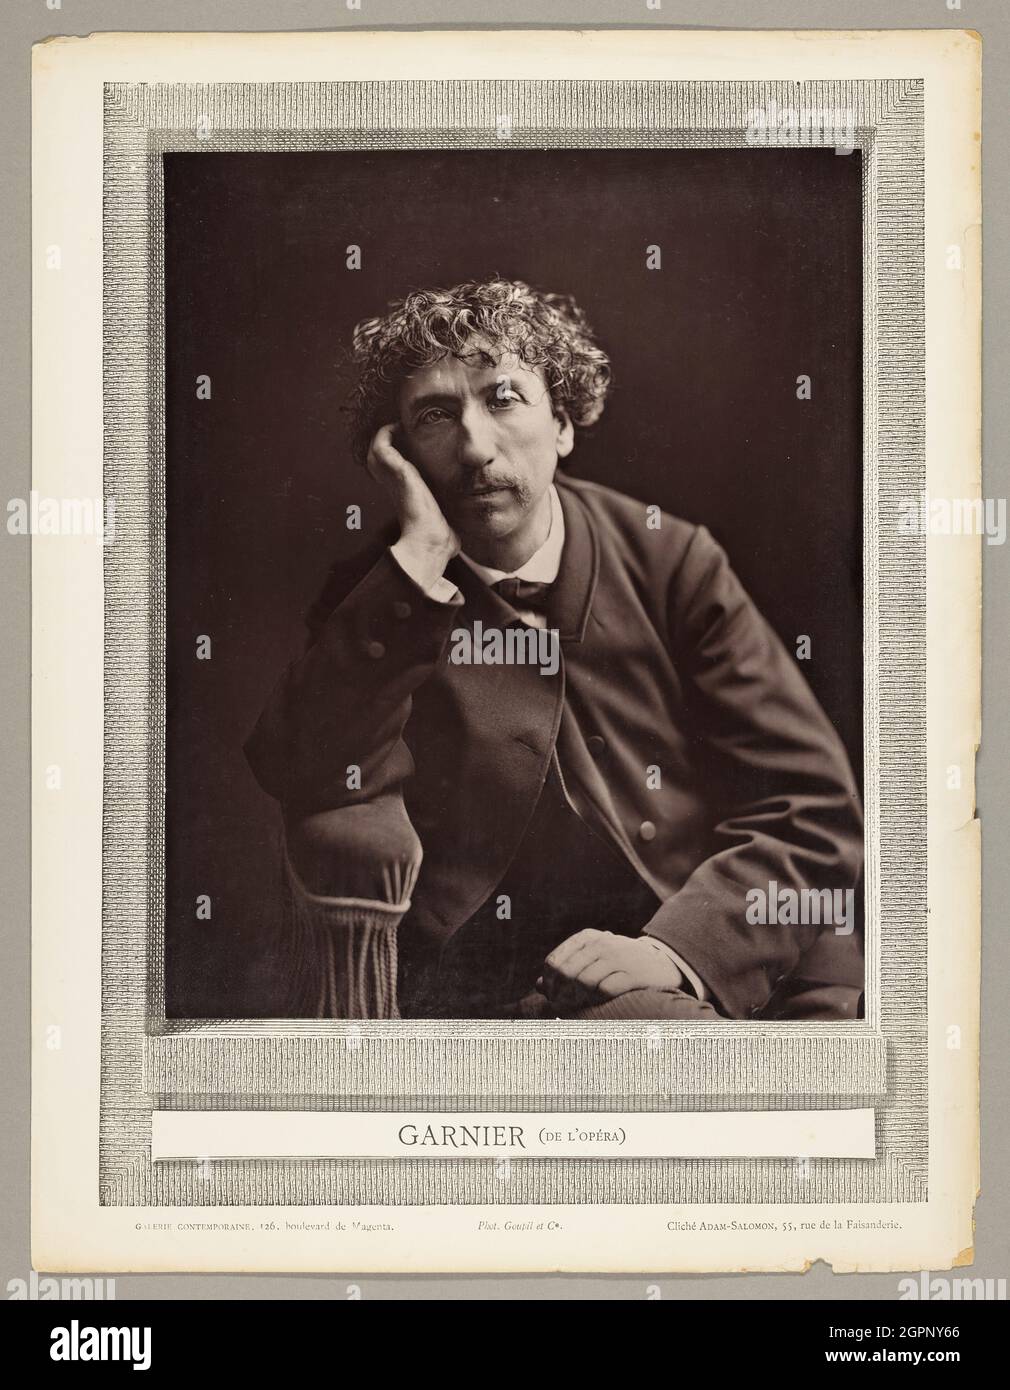 Charles Garnier (French architect, 1825-1898), 1876/84. Woodburytype, from the periodical &quot;Galerie Contemporaine Litt&#xe9;raire, Artistique&quot; (1877), volume 4. Stock Photo